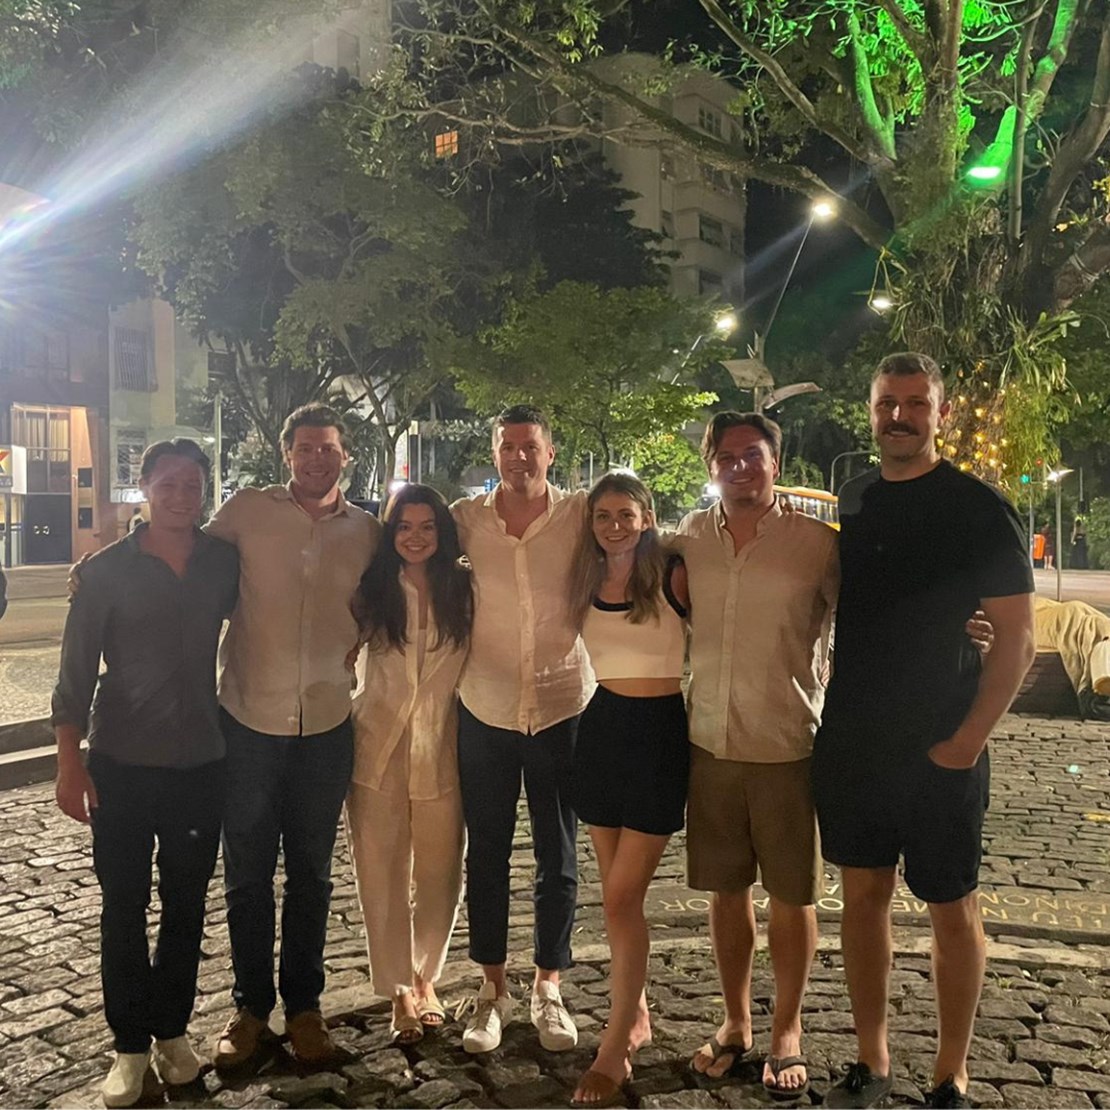 Group photo at night in Brazil